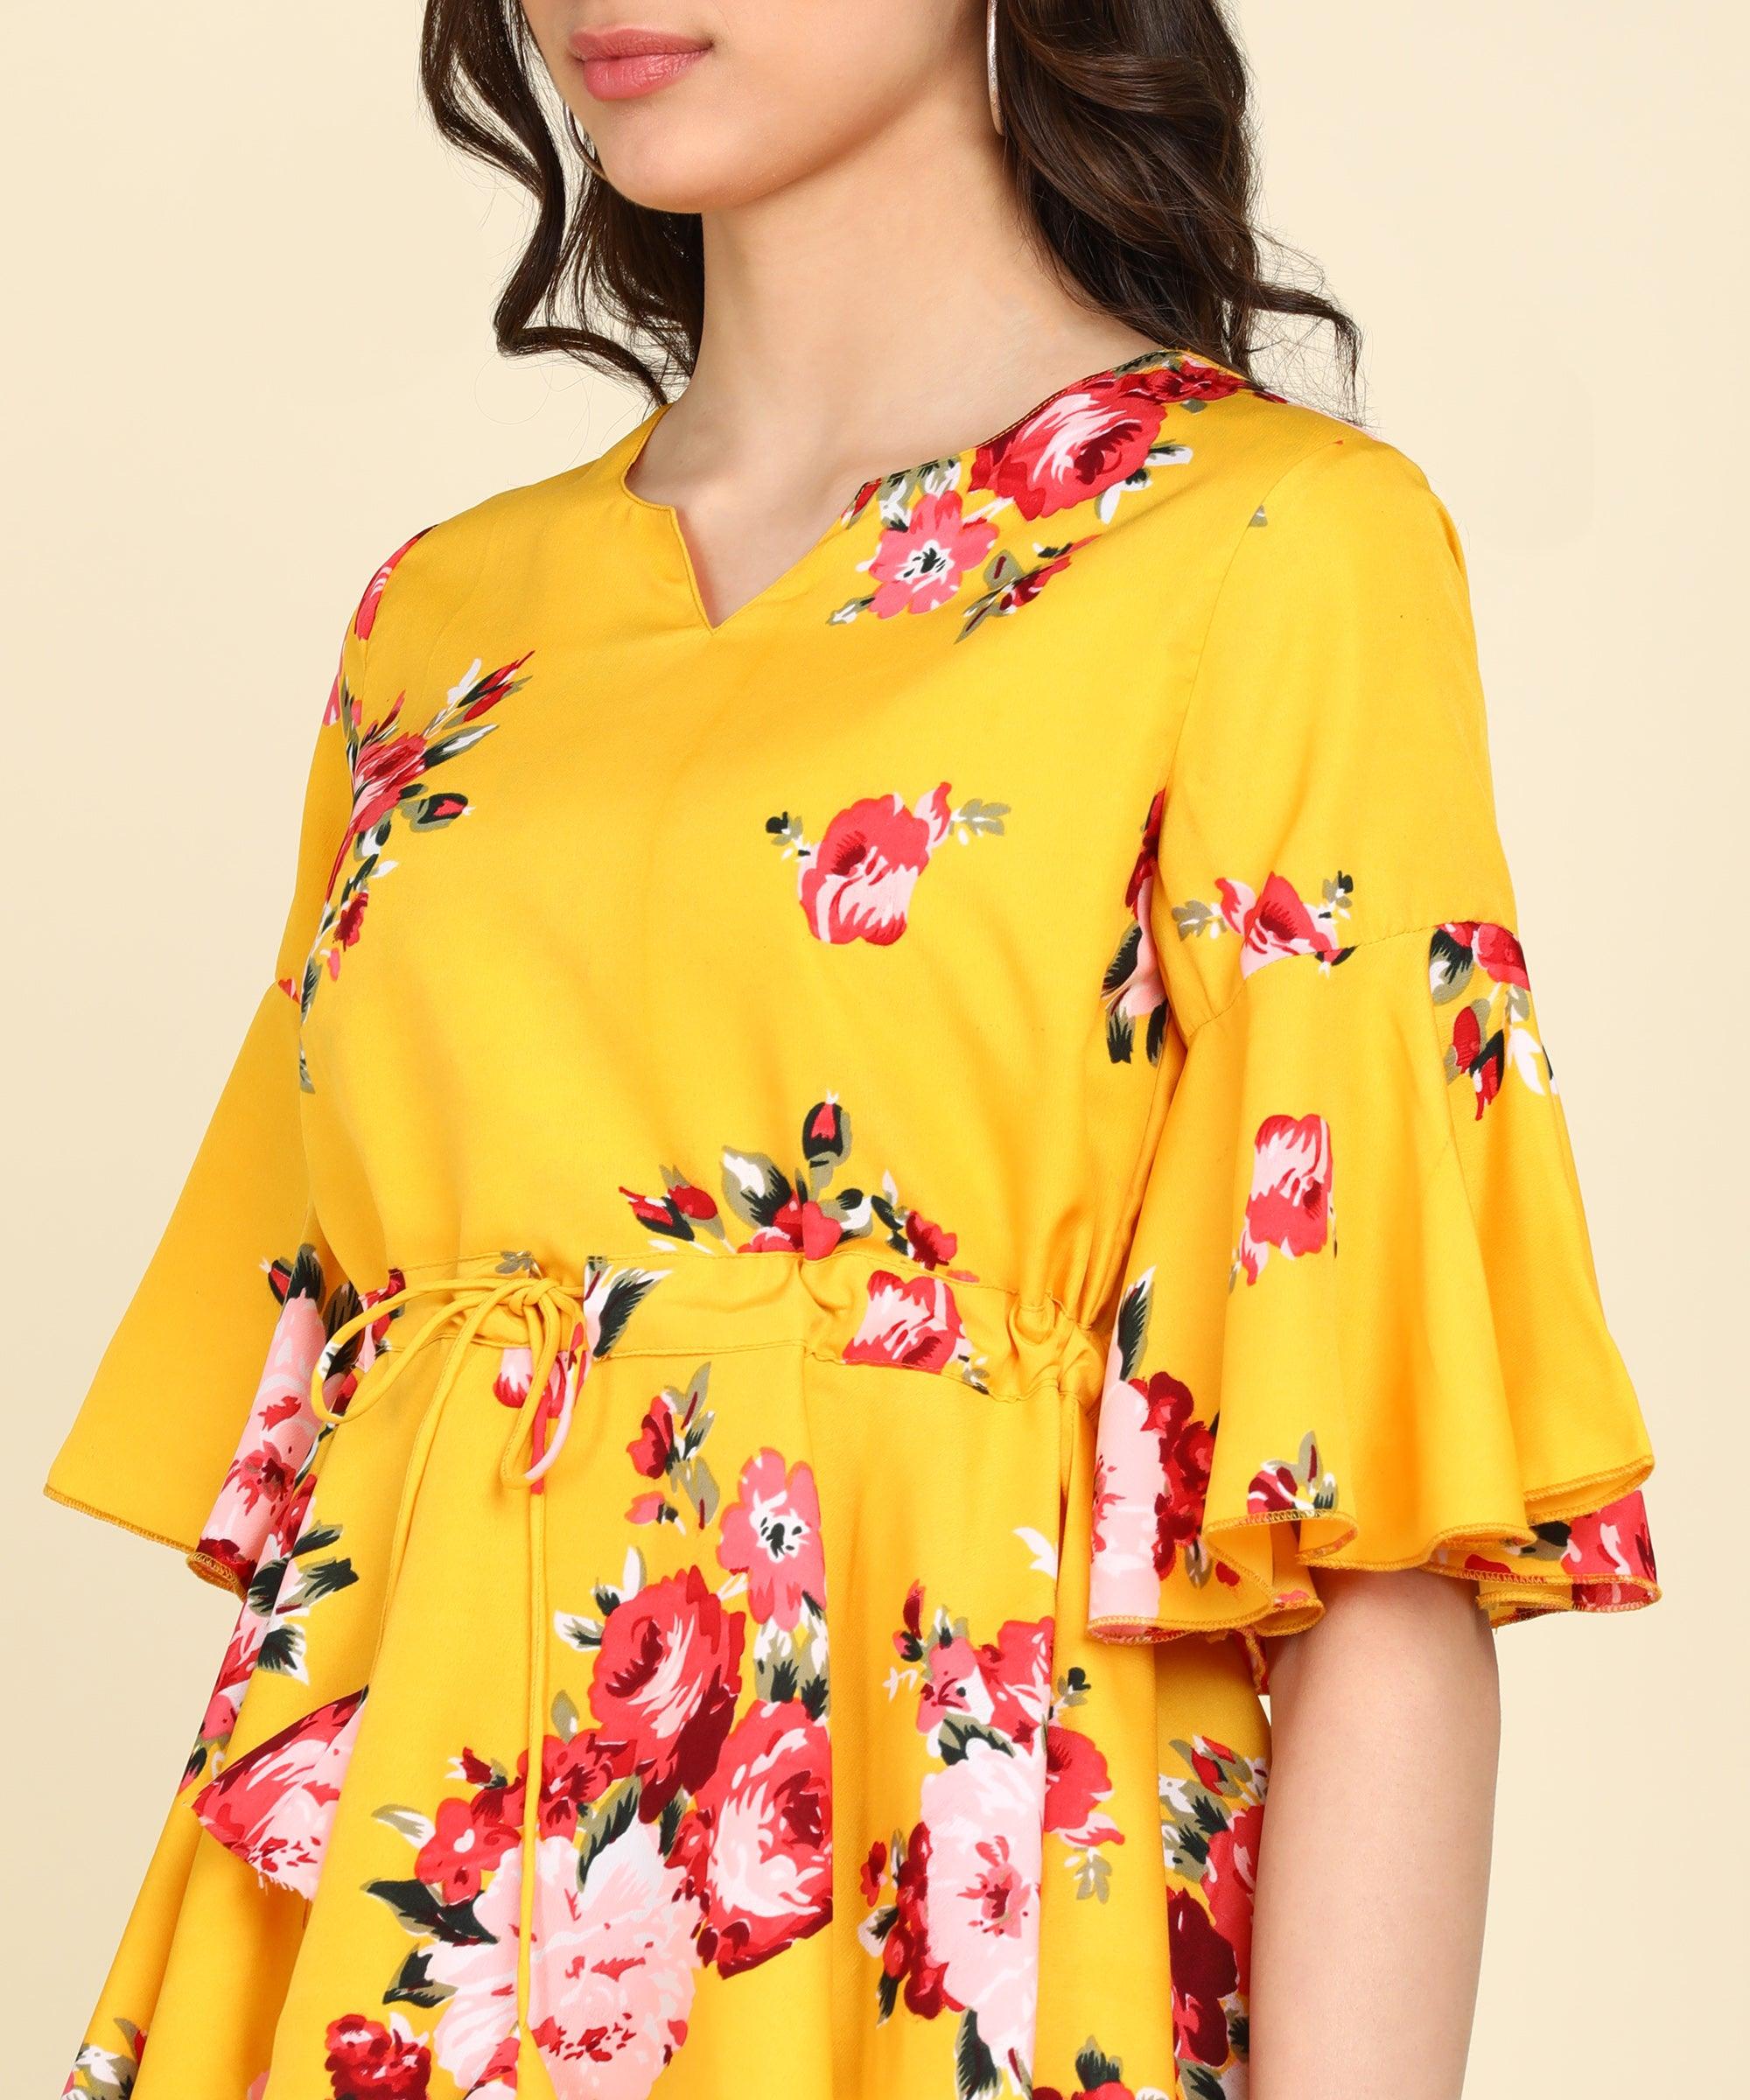 Floral Prinatd Yellow Top - Znxclothing